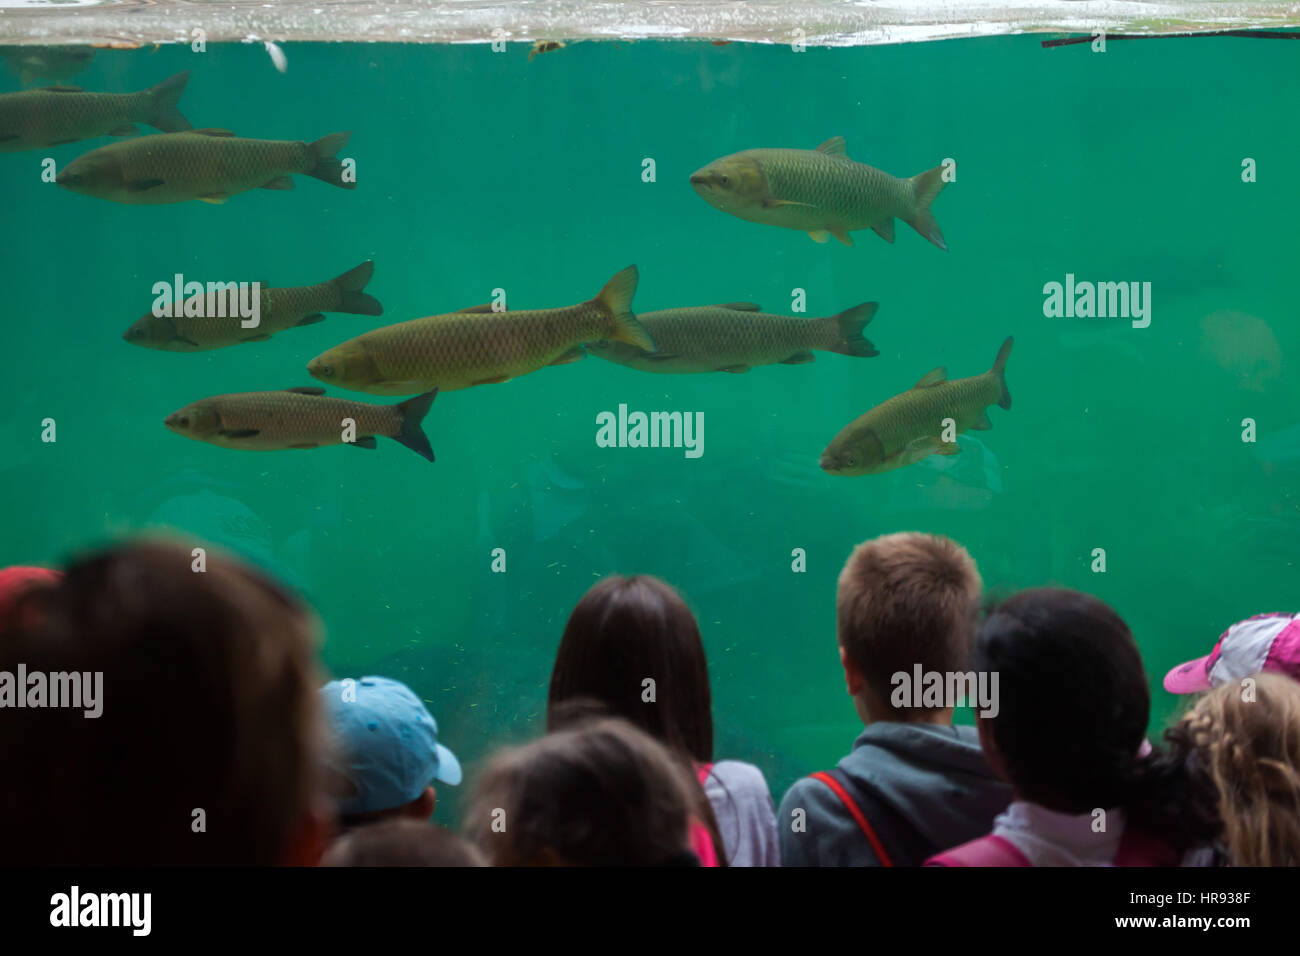 Visitors look as the grass carp (Ctenopharyngodon idella) swimming at Beauval Zoo in Saint-Aignan sur Cher, Loir-et-Cher, France. Stock Photo